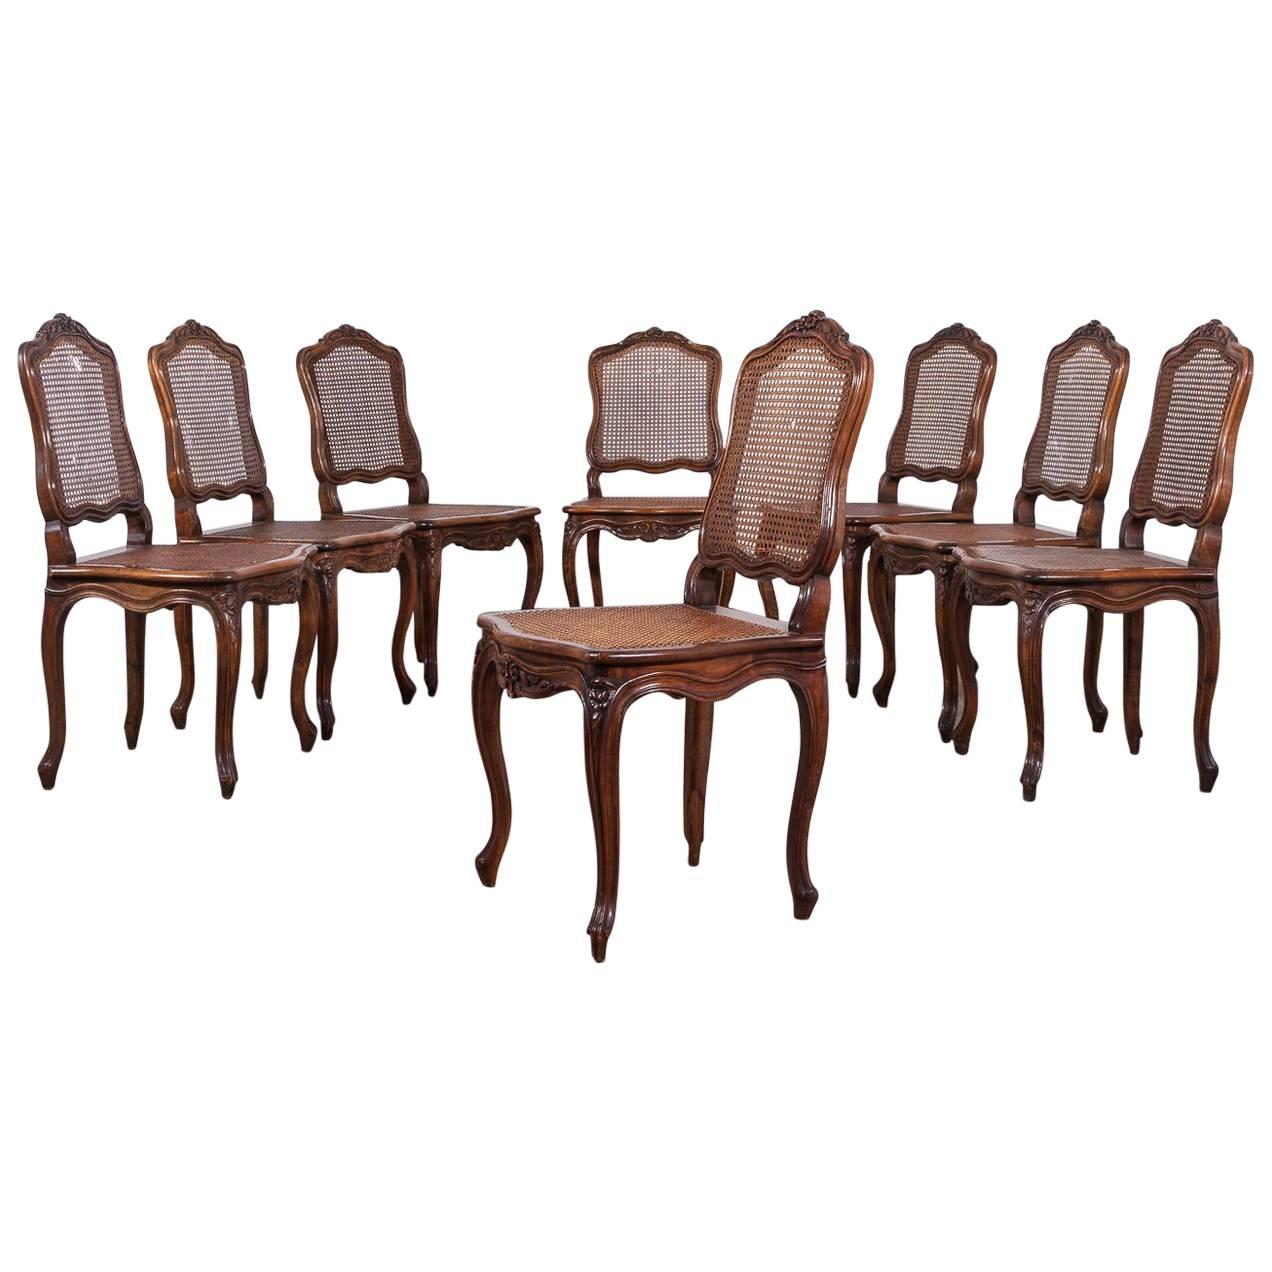 Set of Eight Early 20th Century French Fruitwood Chairs